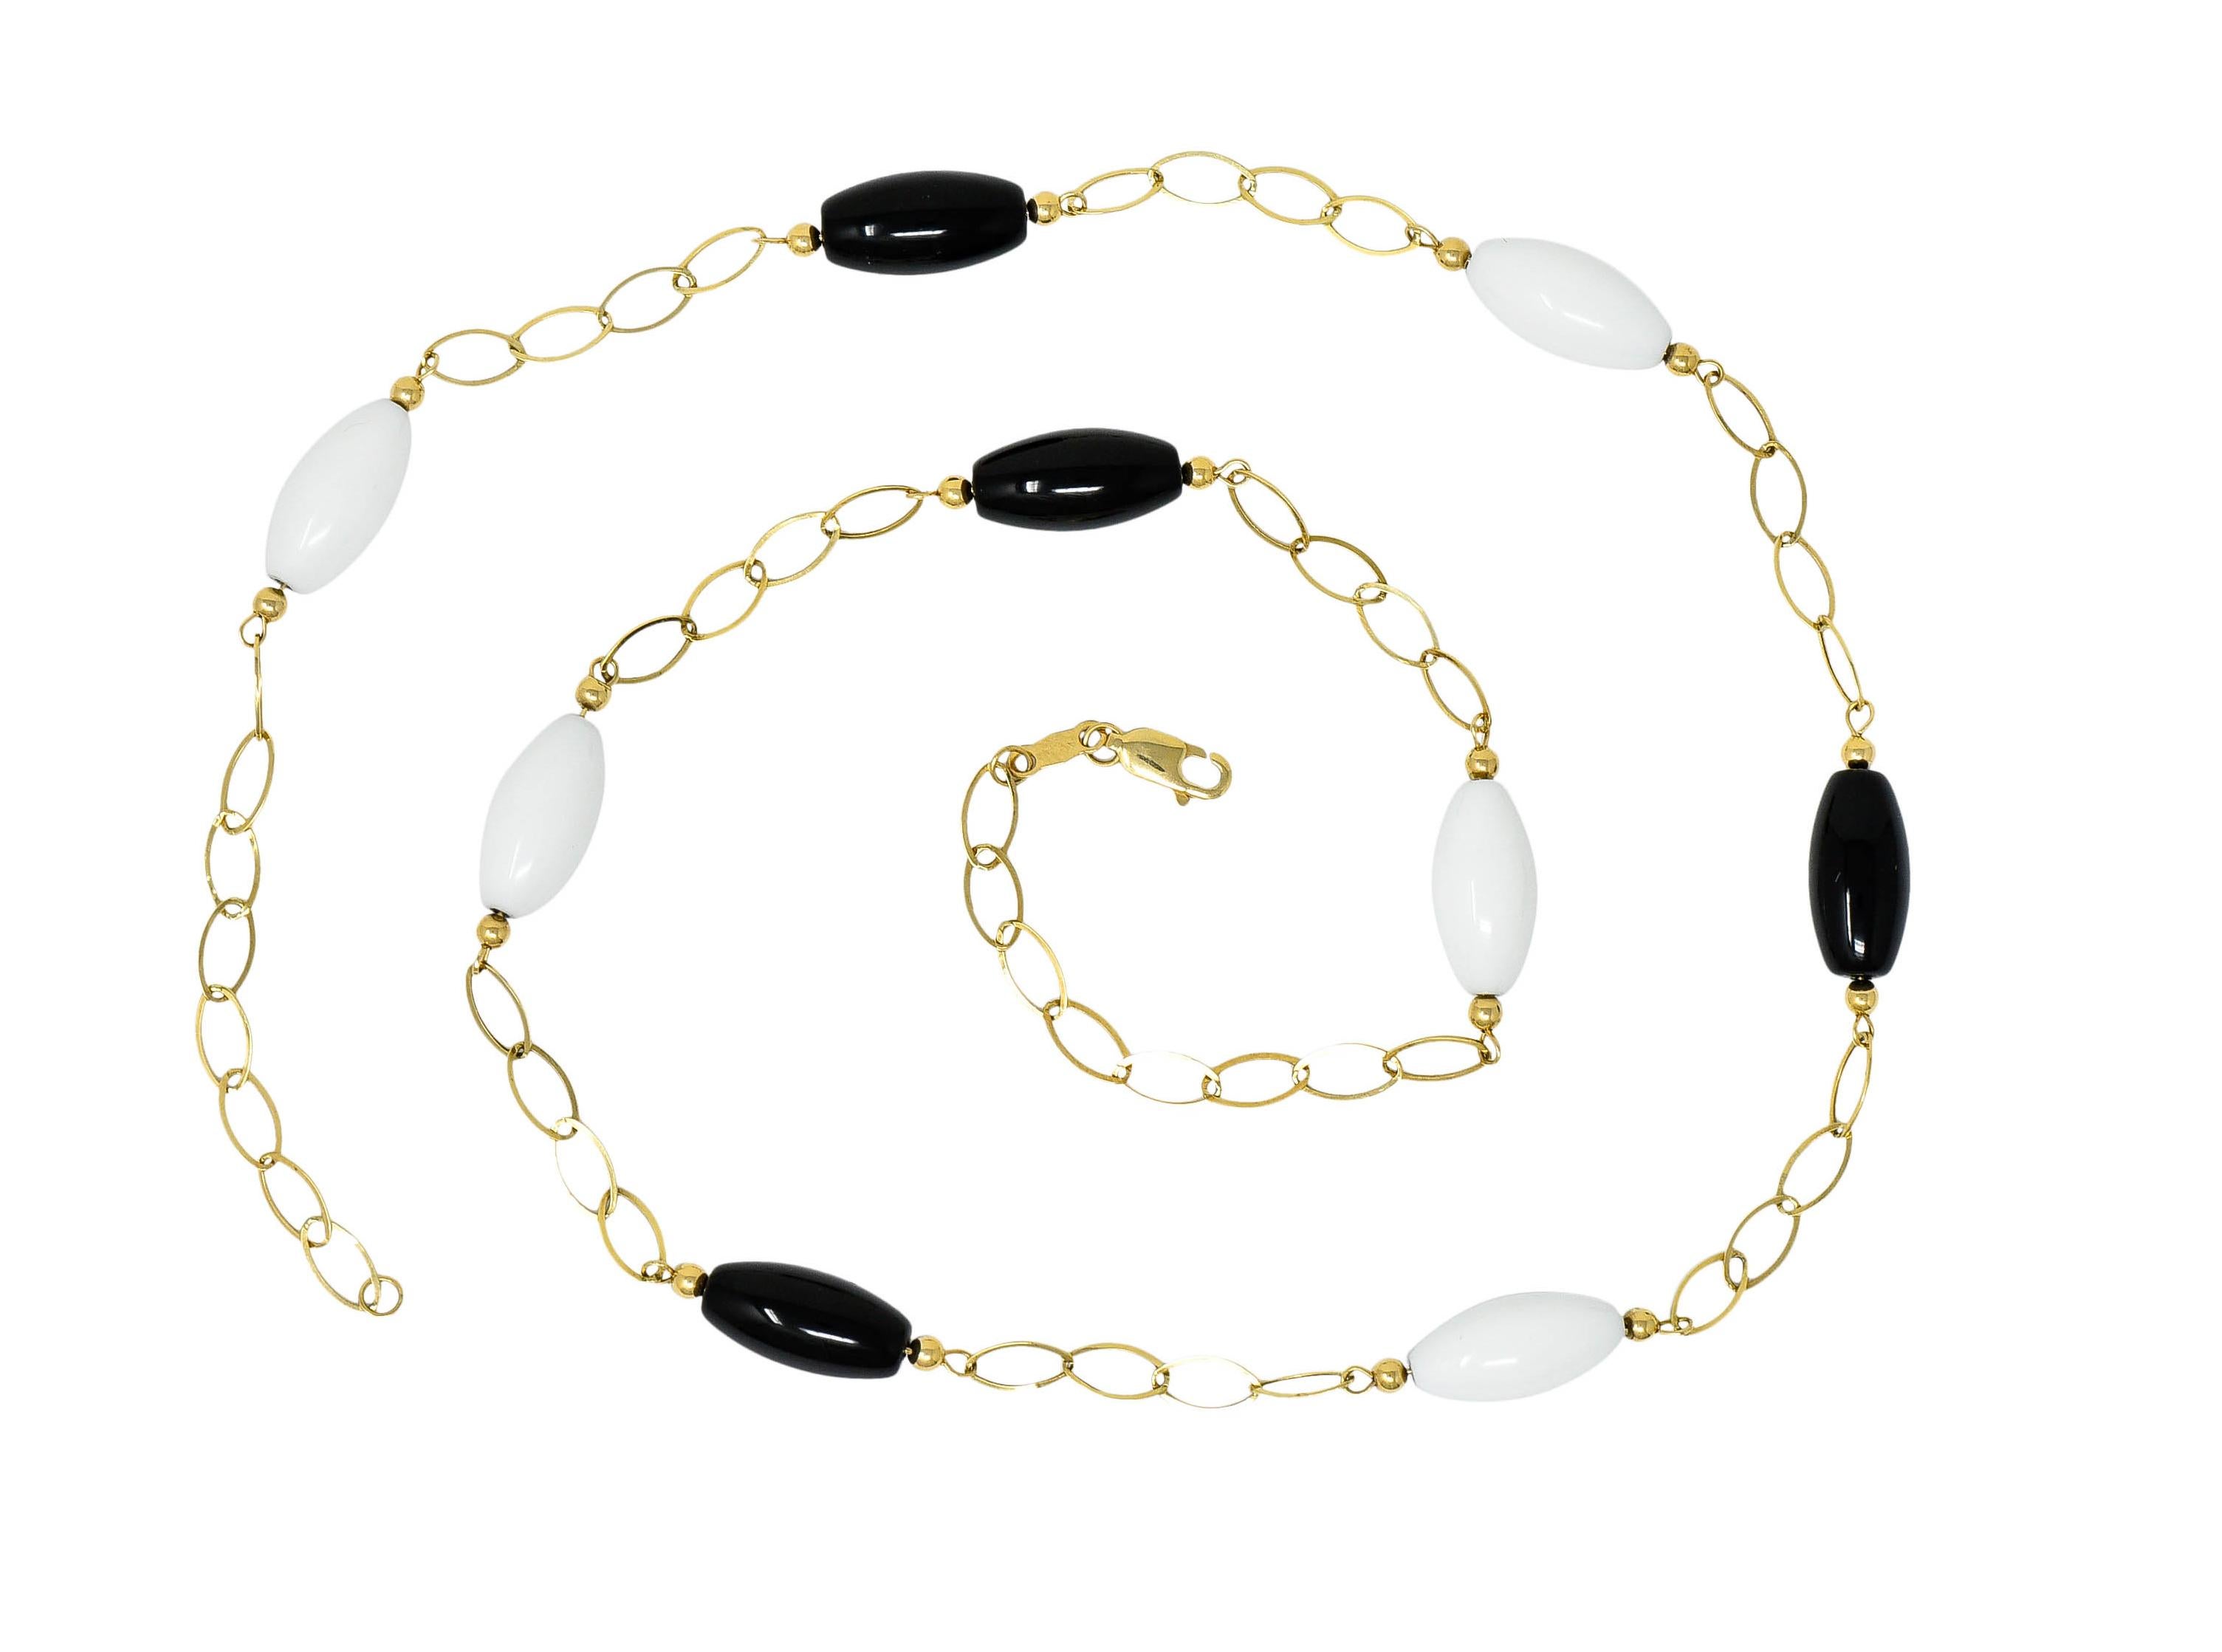 Necklace is comprised of polished gold oval links

With nine agate bead stations evenly spaced throughout

Alternating opaque black and white color

Completed by a lobster clasp

Maker's mark and stamped 14K for 14 karat gold

Circa: 2000s

Length: